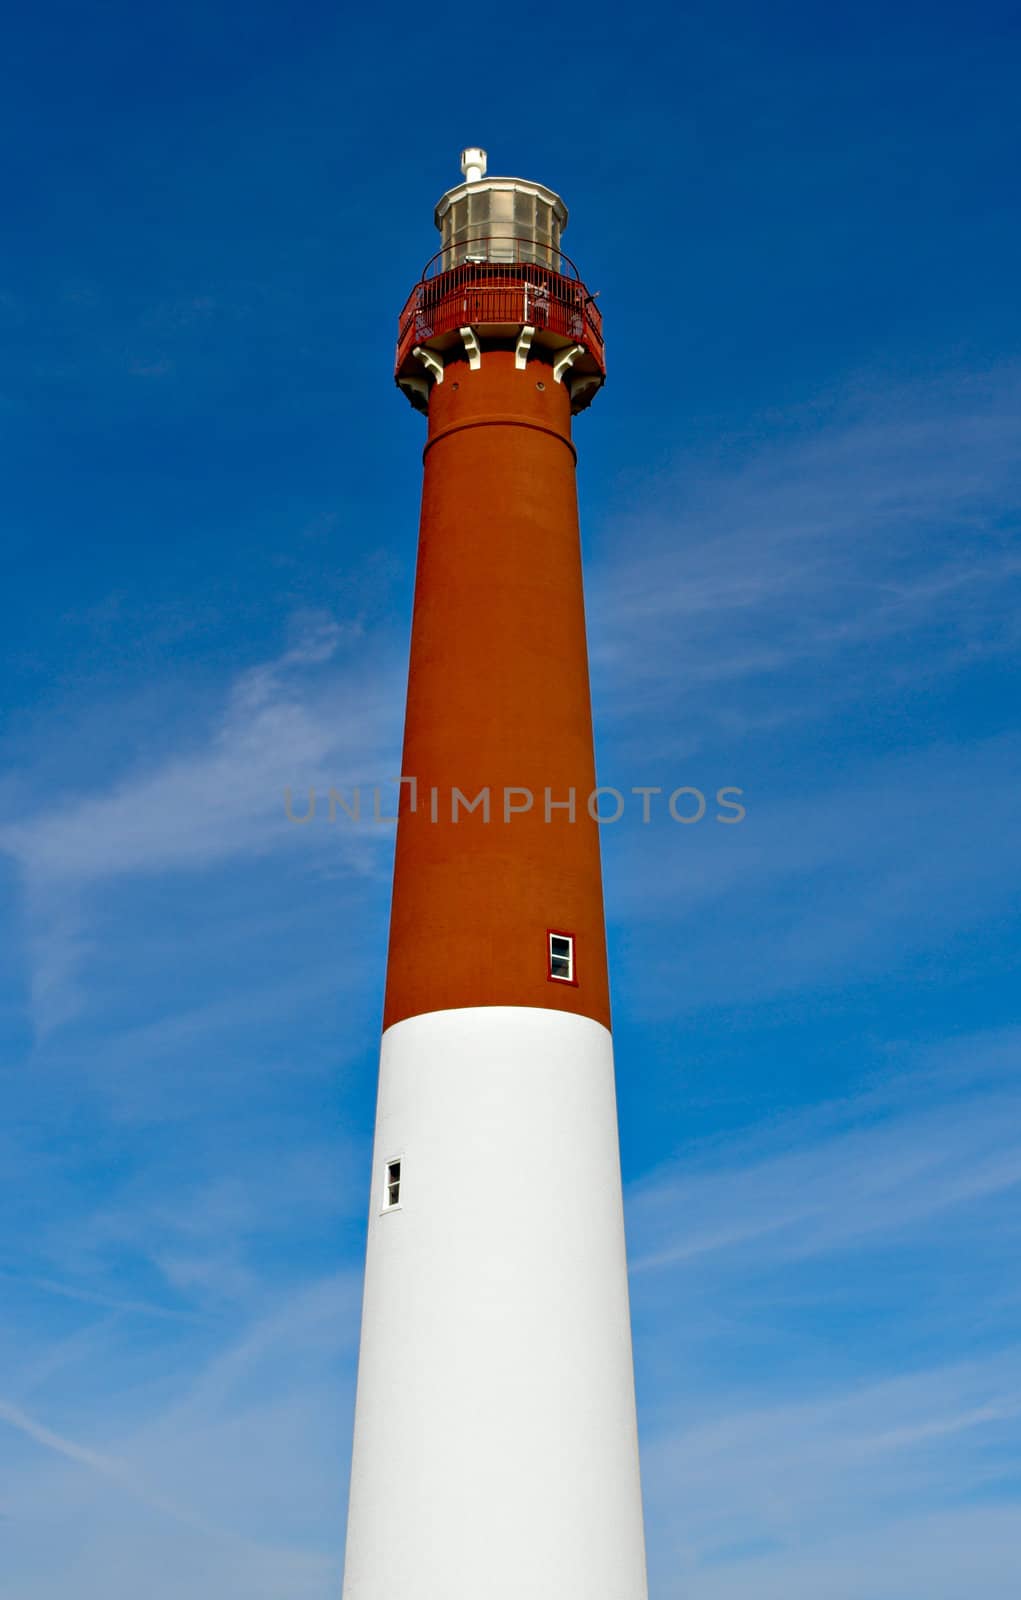 A red and white lighthouse against a blue sky.